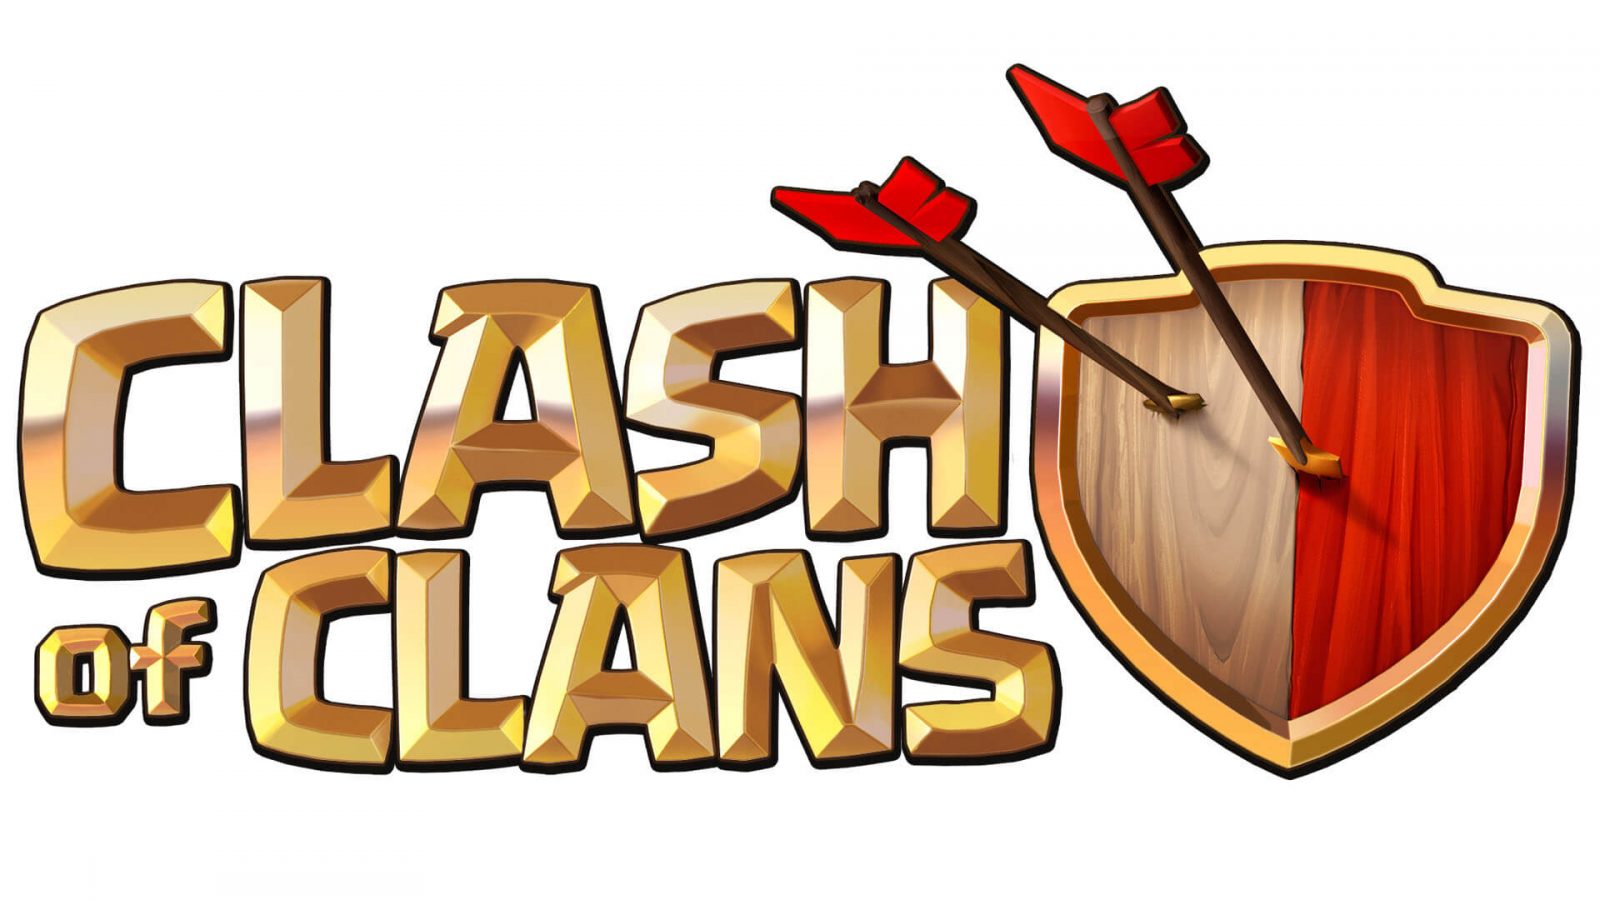 Clash of Clans for Mac Free Download | Mac Games